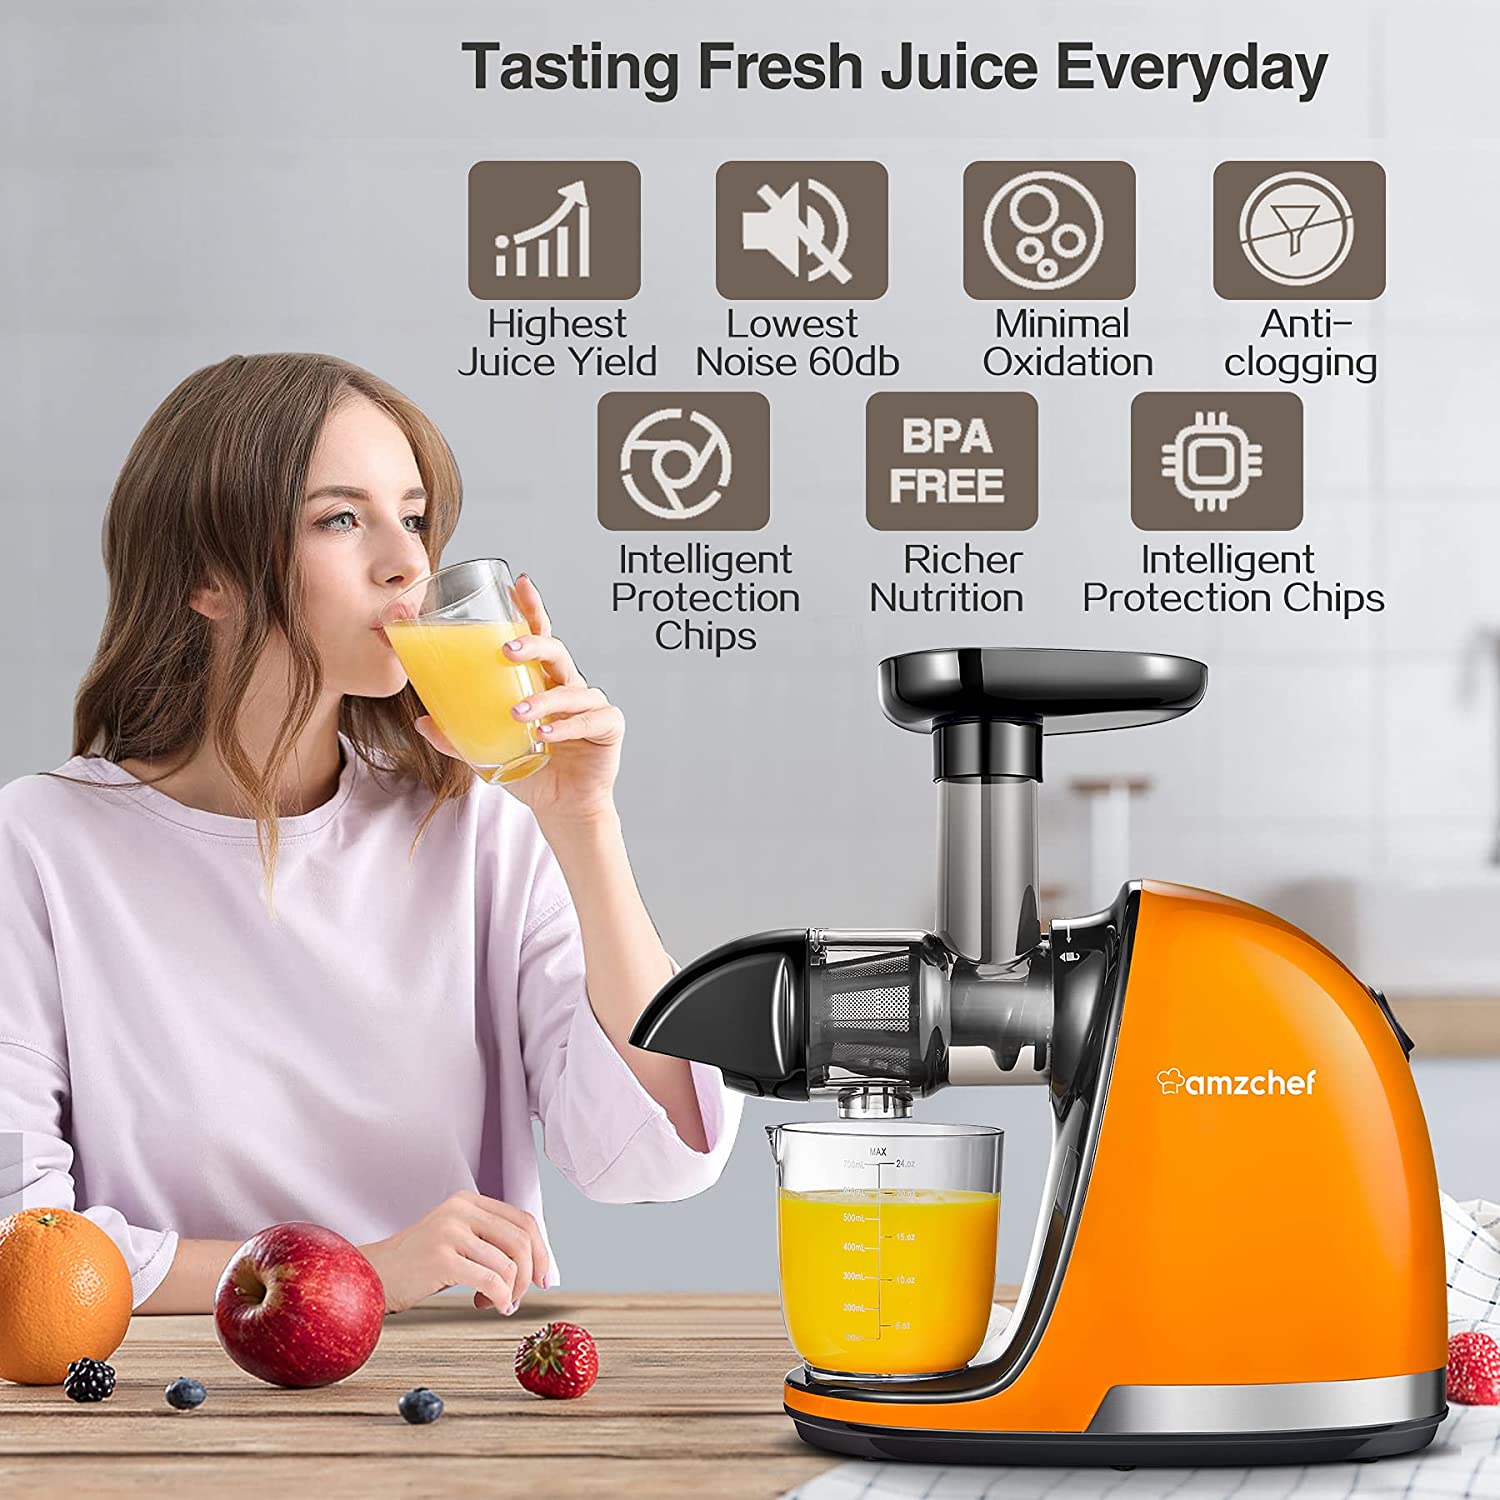 https://iamzchef.com/cdn/shop/products/amzchefColdPressJuicer_SlowMasticatingJuicerMachineswithReverseFunctionAnti-Clogging_QuietMotorSlowJuicerExtractorwithBrush_FruitJuicerwithPlasticWrench_forHighNutrientFruit_Vegetable_26317179-3ab9-4042-9b0a-7799655a9db2.jpg?v=1648275975